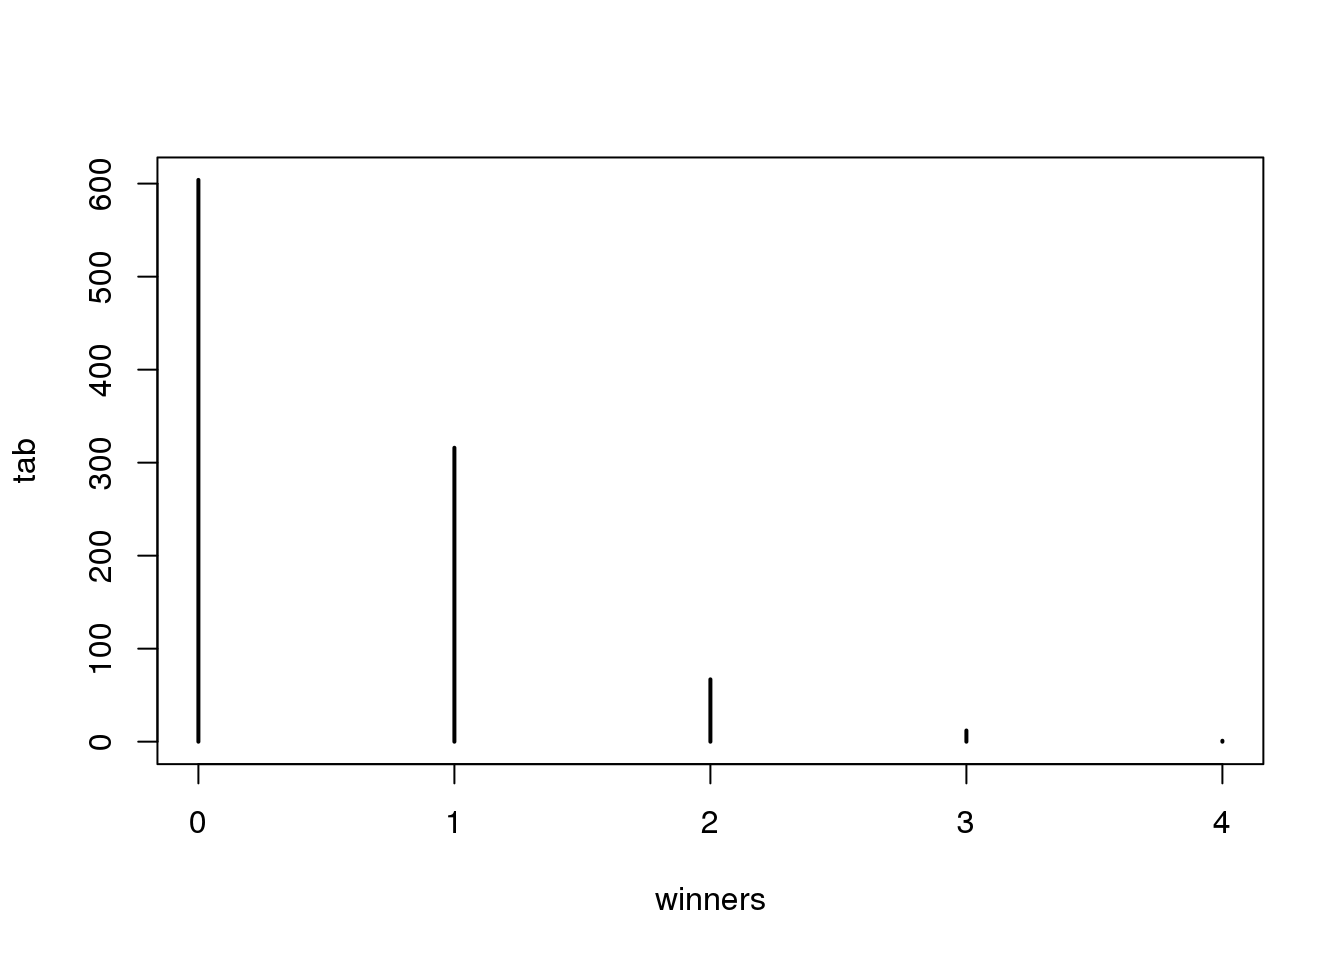 Number of people that win the lottery obtained from Monte Carlo simulation.